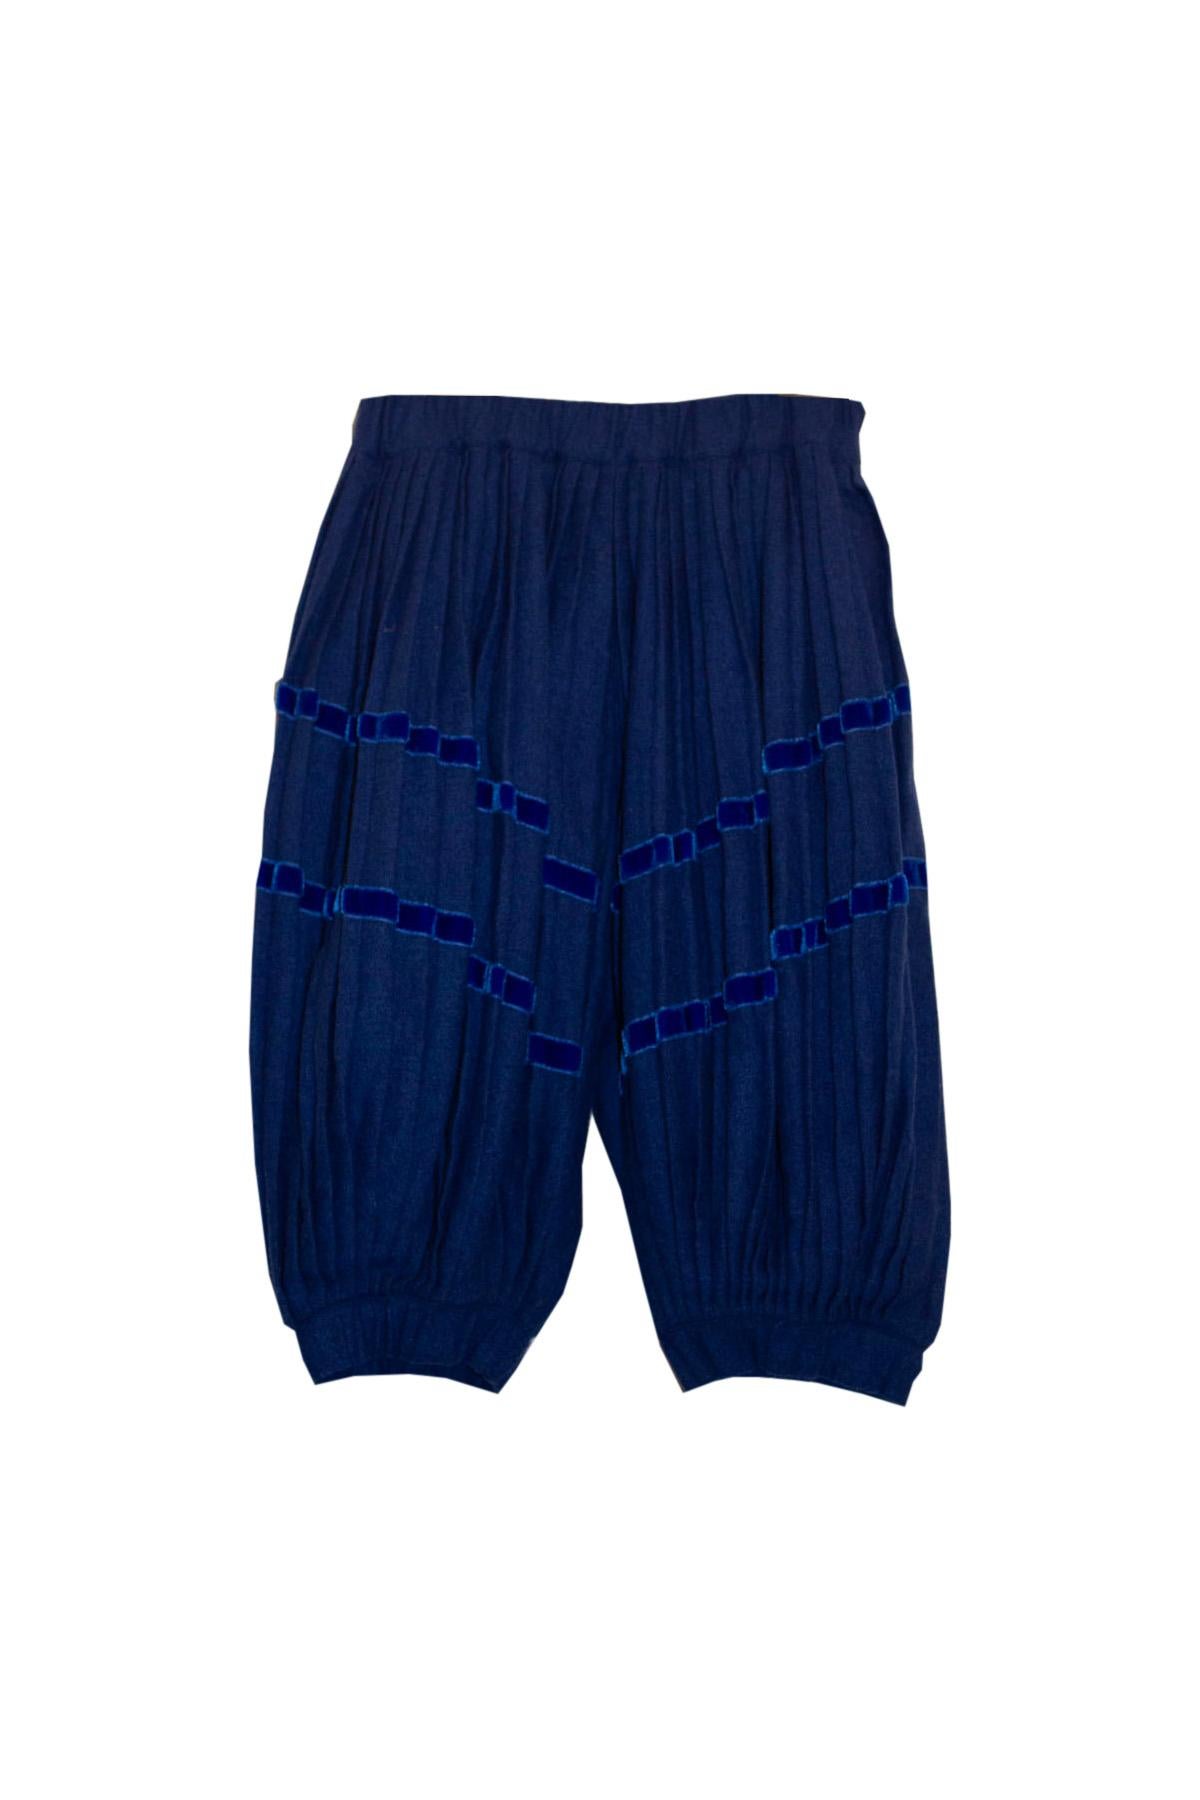 Vintage Kenzo Blue Pleated Knickerbockers/Shorts In Good Condition For Sale In London, GB